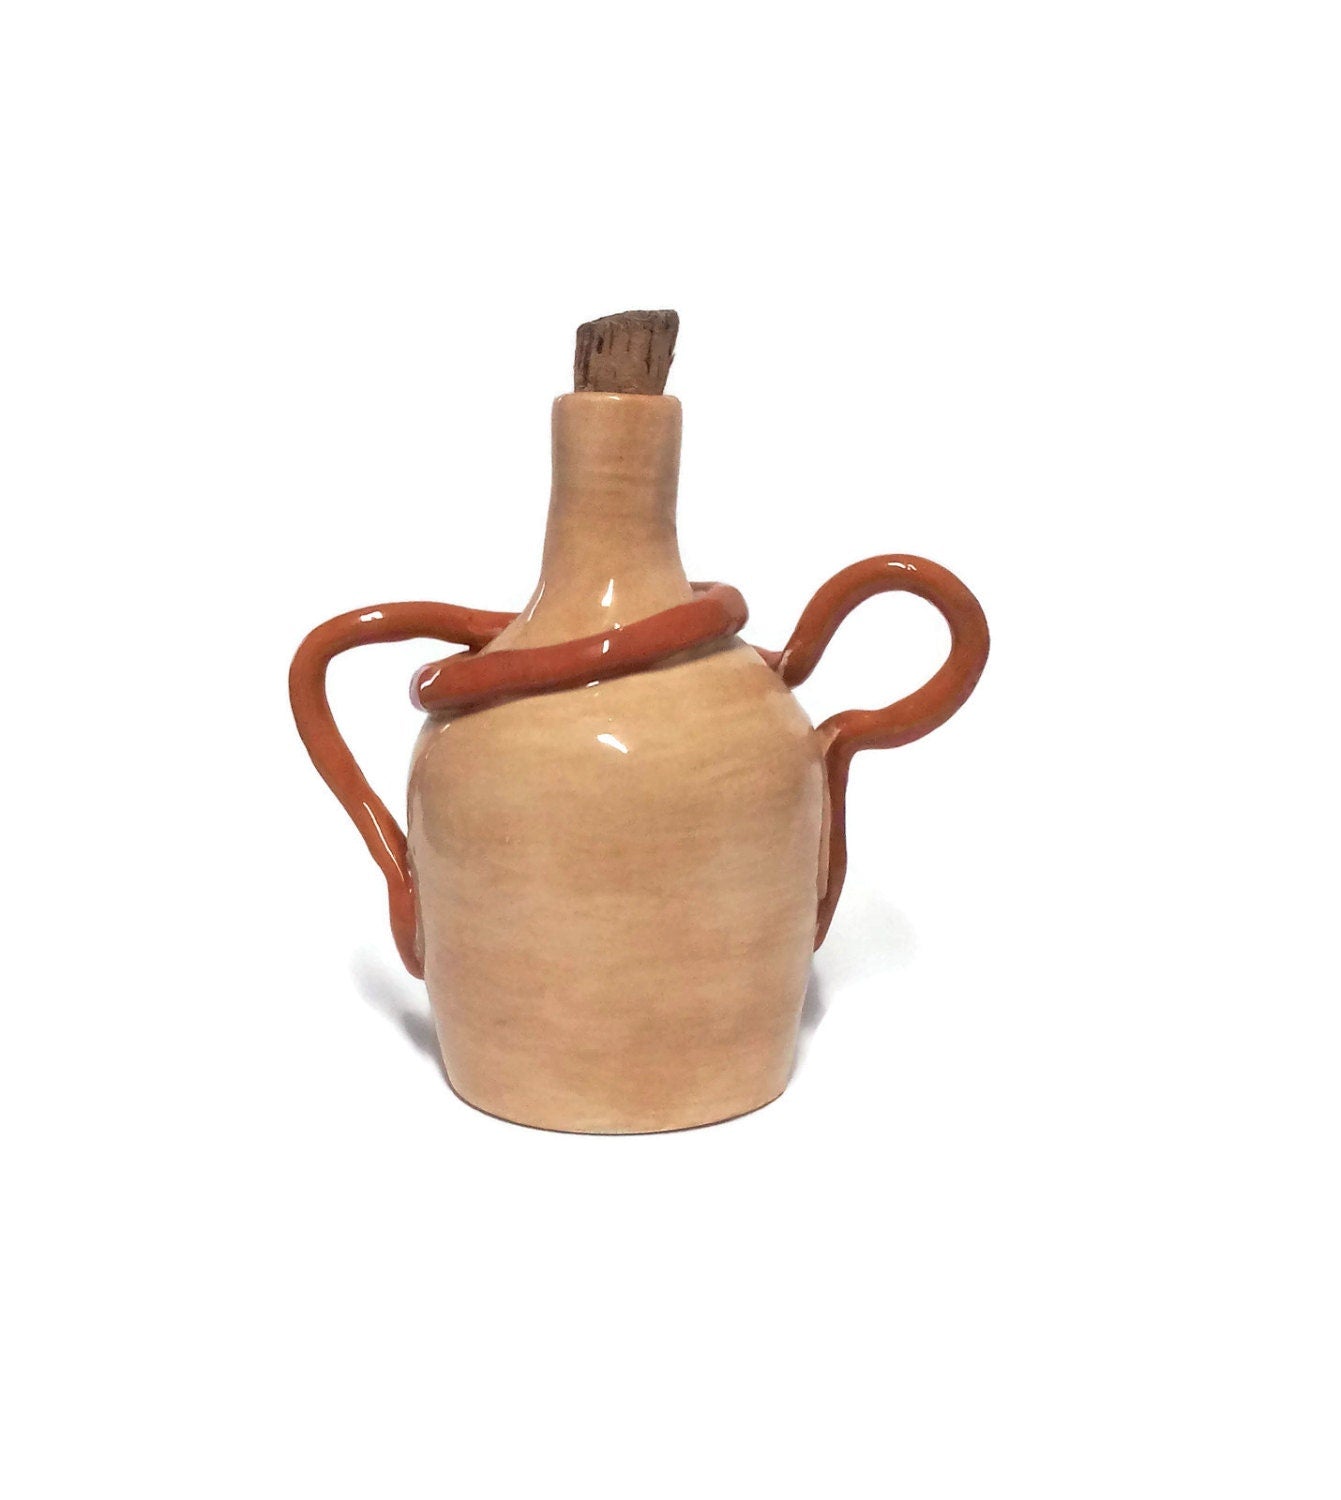 Handmade Ceramic Bottle With Cork Stopper, First Home Gift, Pottery Vase With Hand Built Sculptural Handles, Mom Birthday Gift From Daughter - Ceramica Ana Rafael